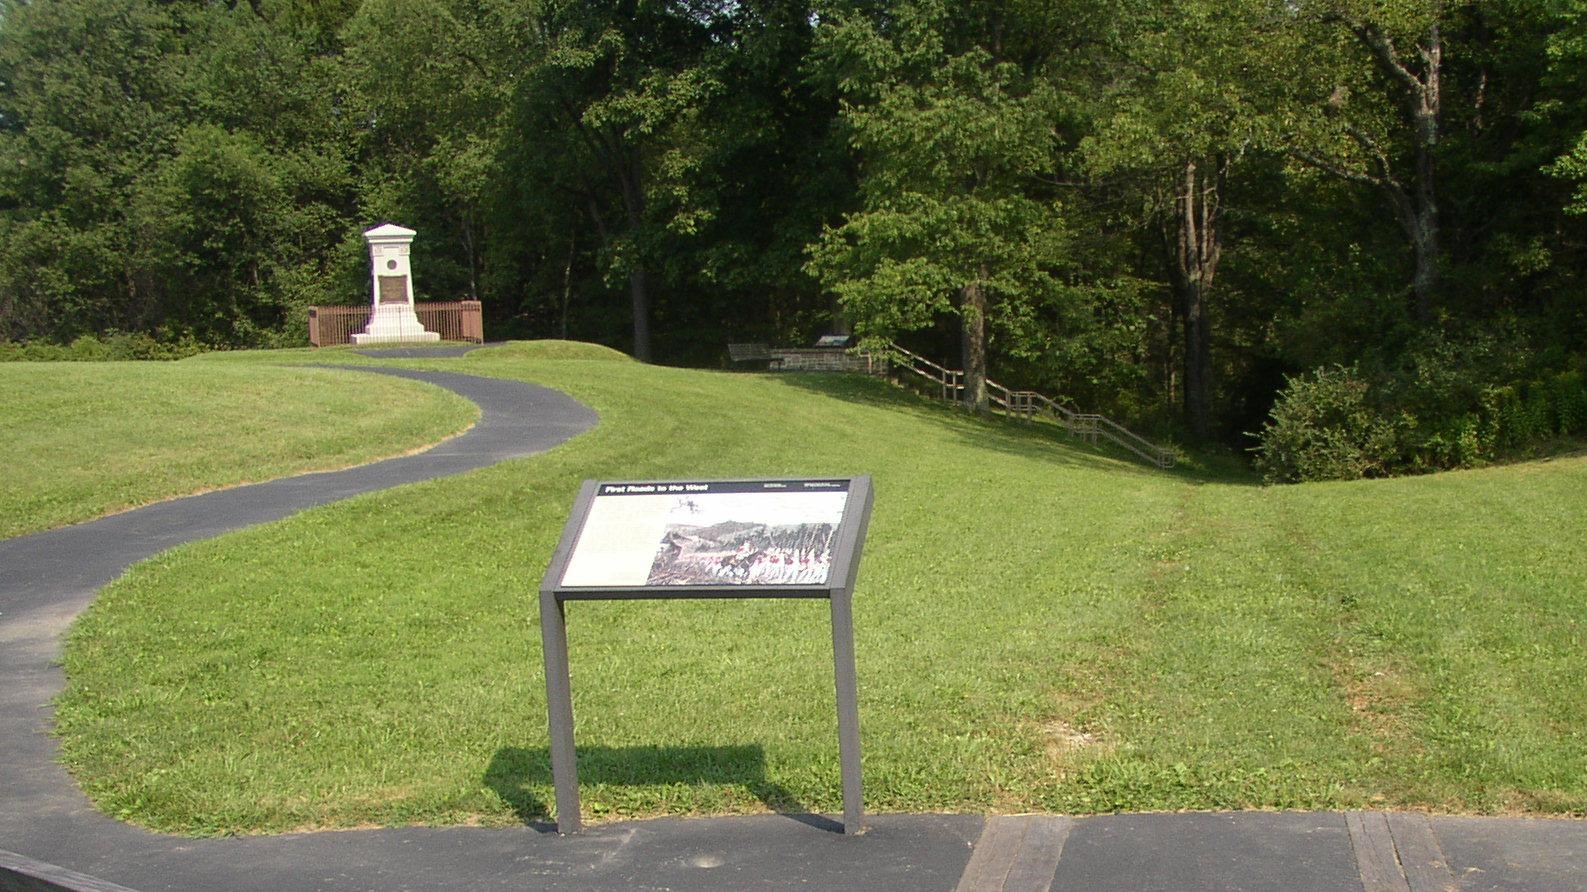 A white monument in the background with an interpretive sign in the foreground